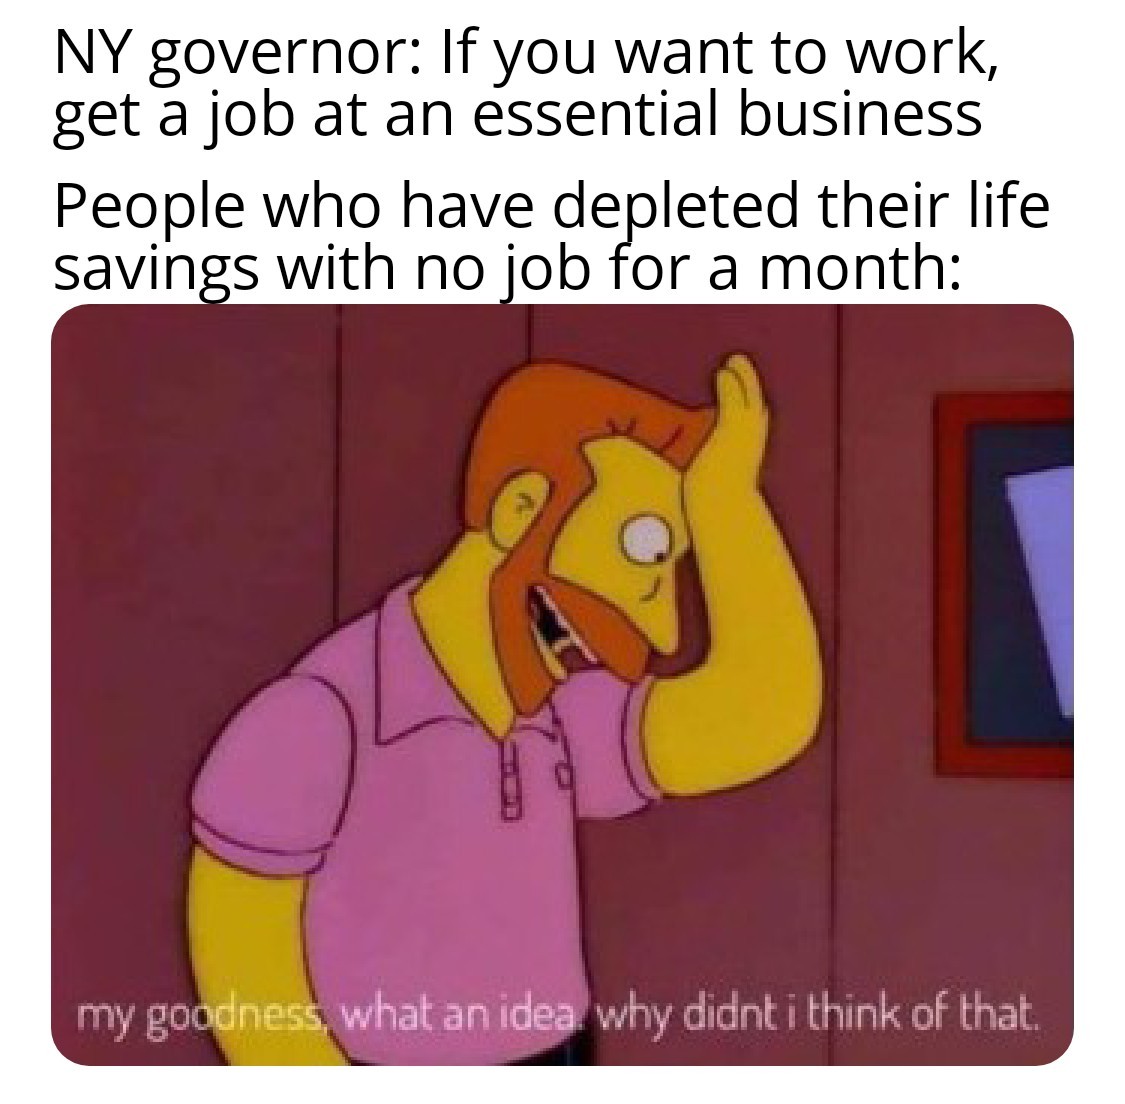 Worst governor? I'd say New York or Michigan - meme